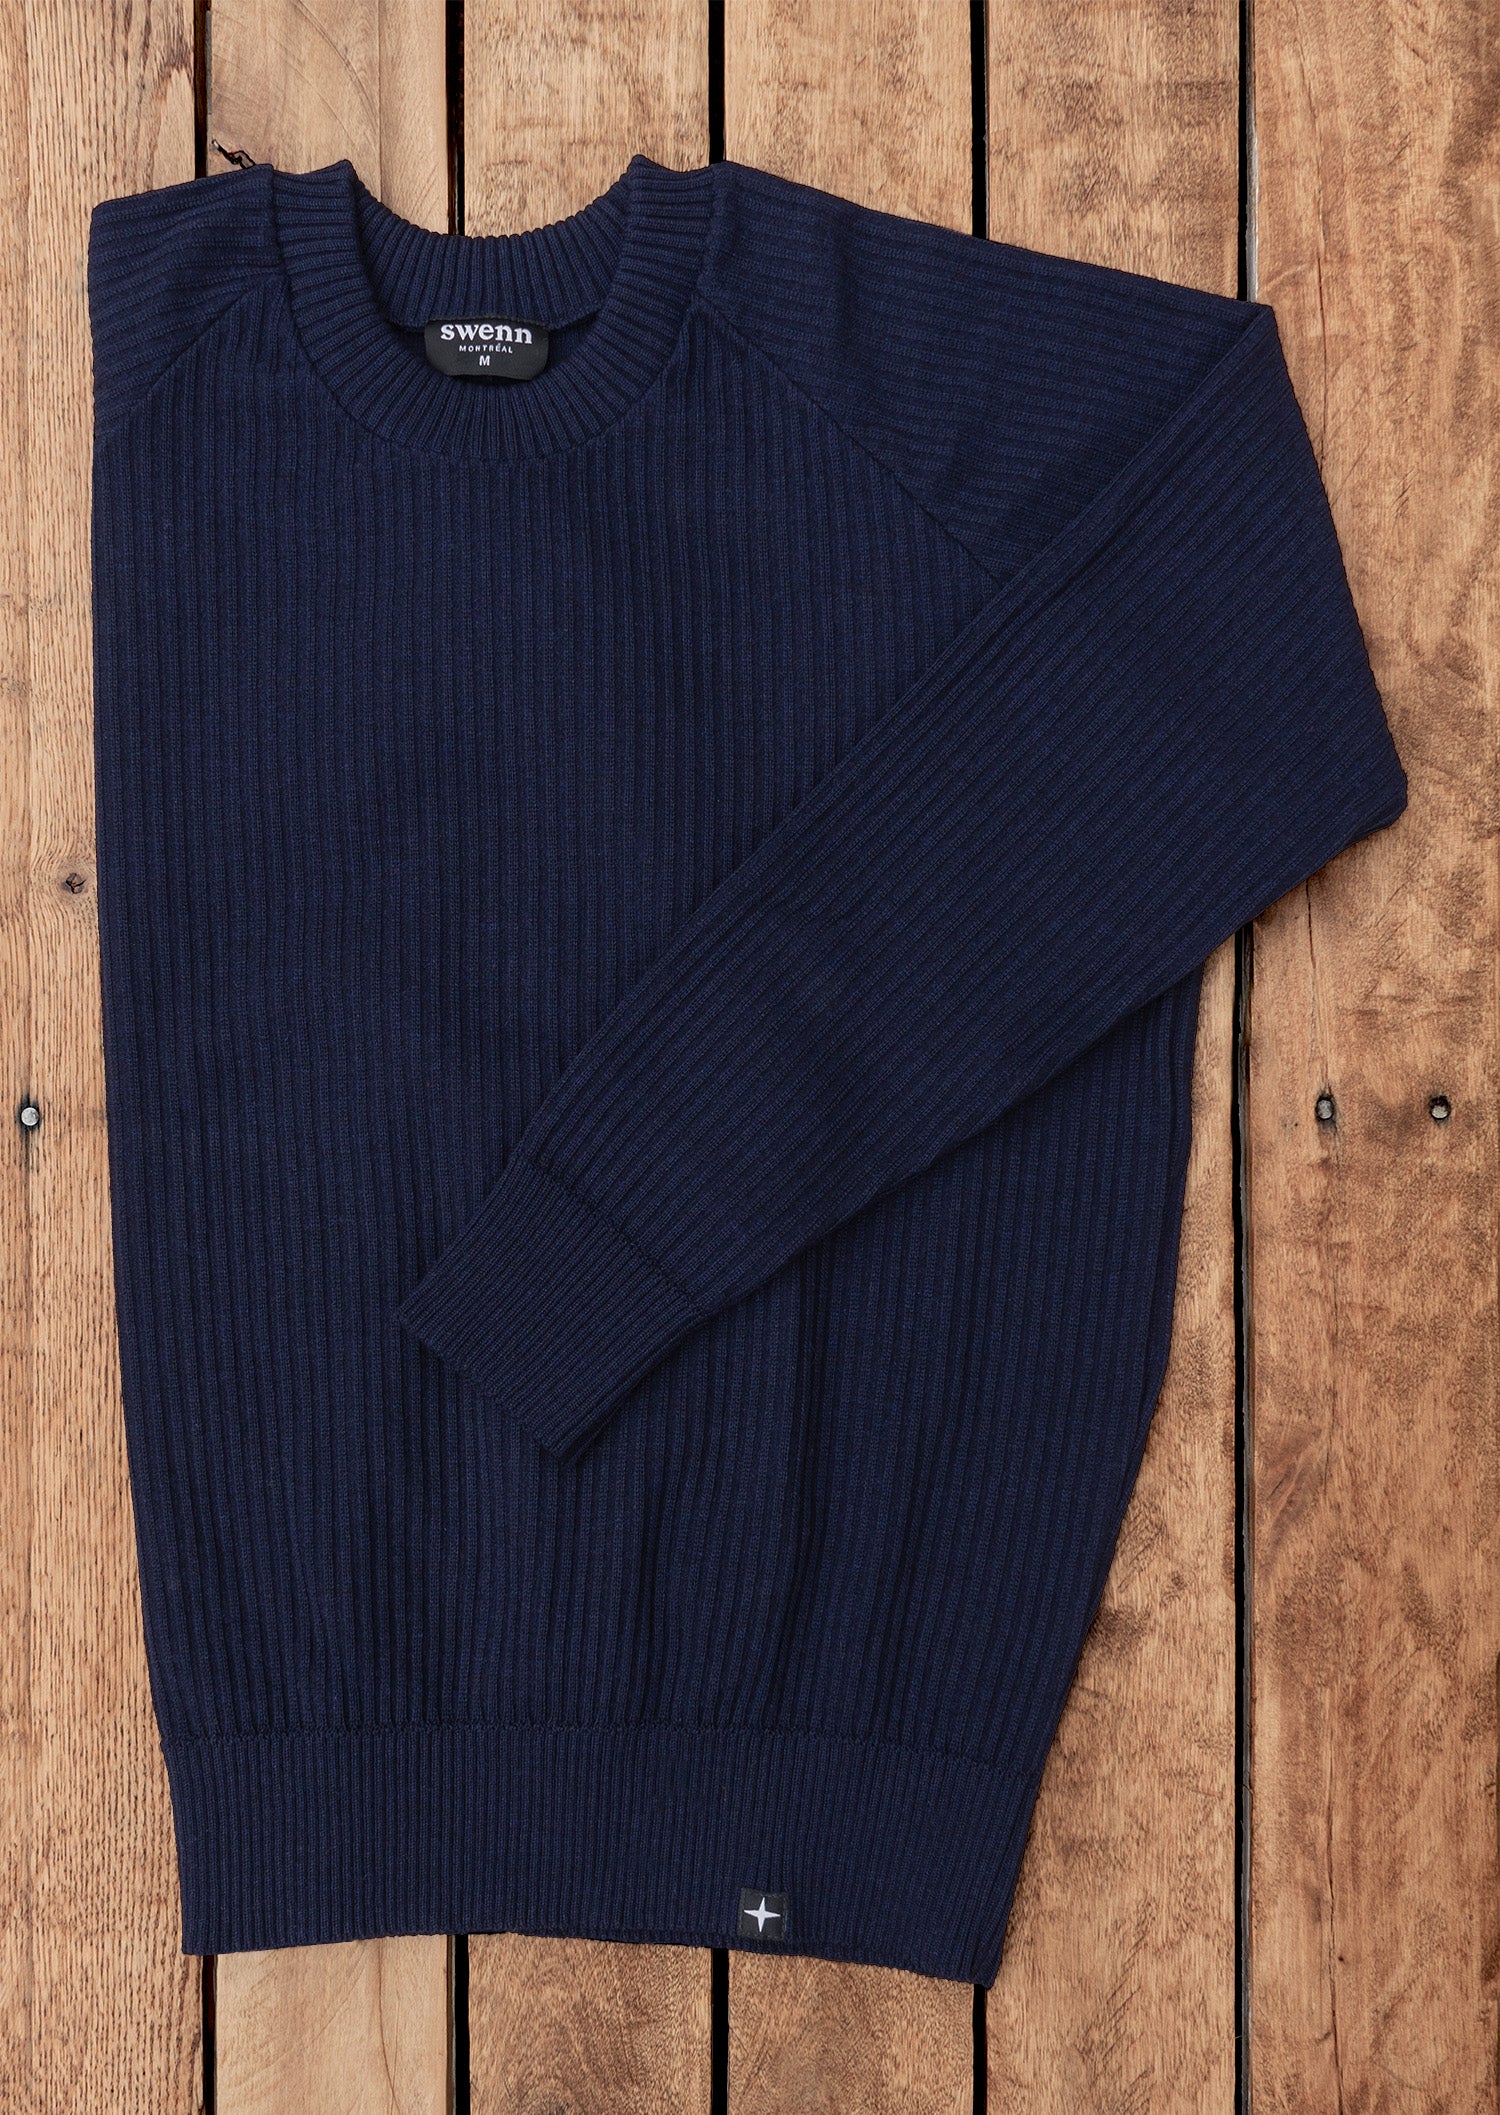 SWENN - Unisex Merino wool and Cashmere sweater, made in Quebec